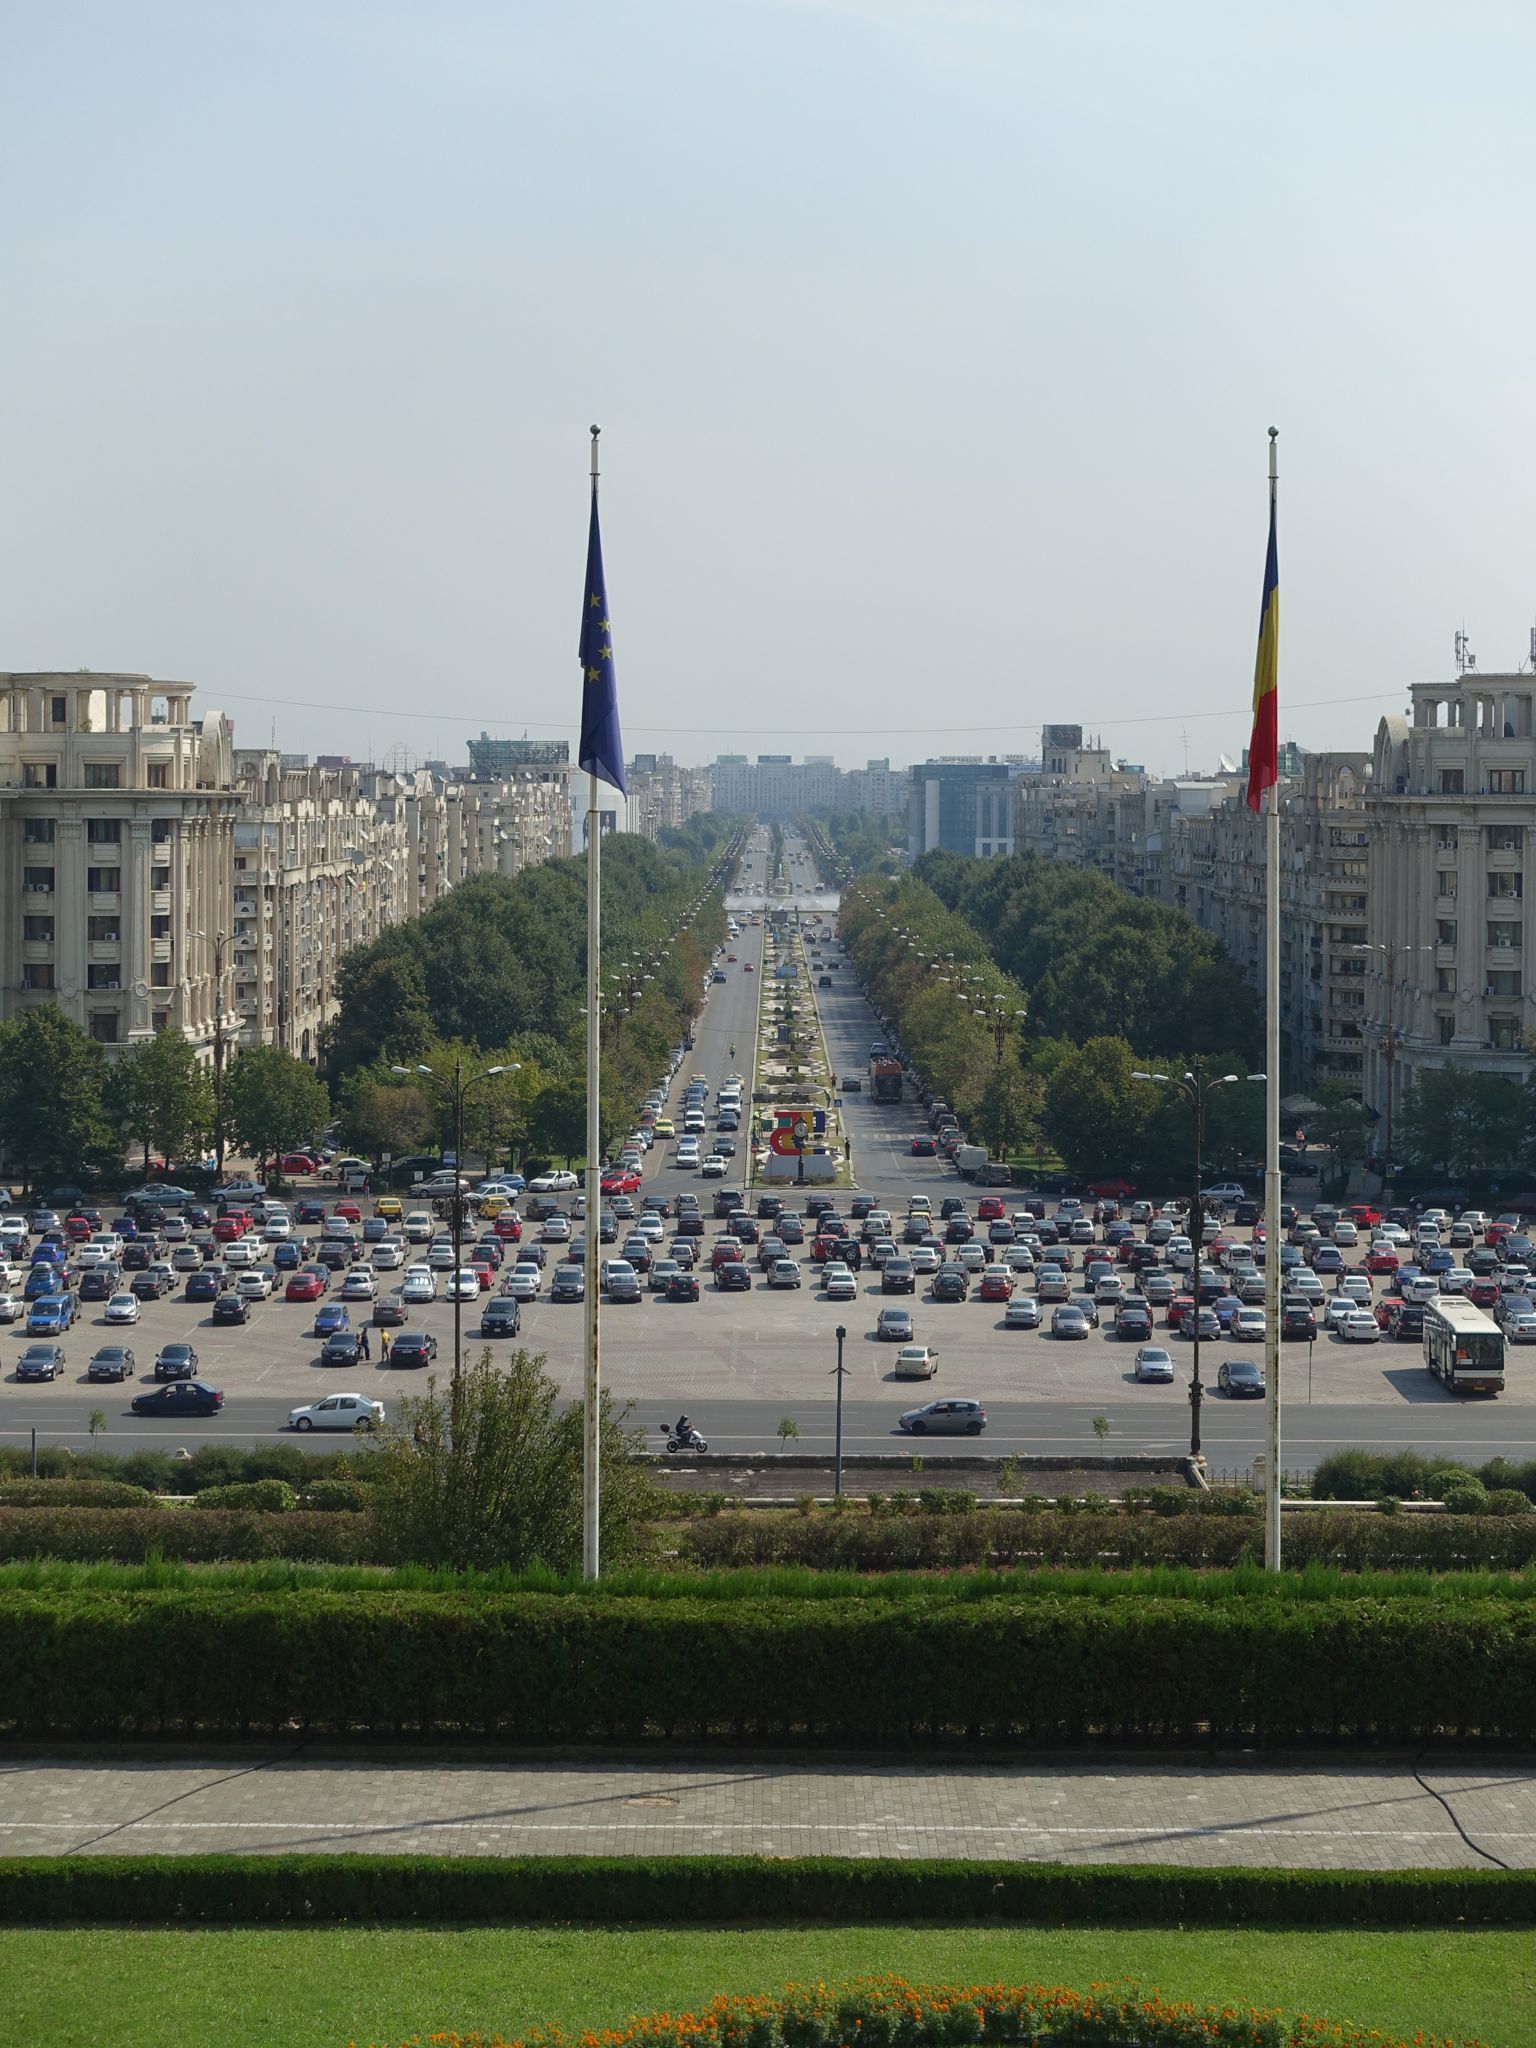 Photo 63 of 133 from the album Highlights Bucharest 2014.